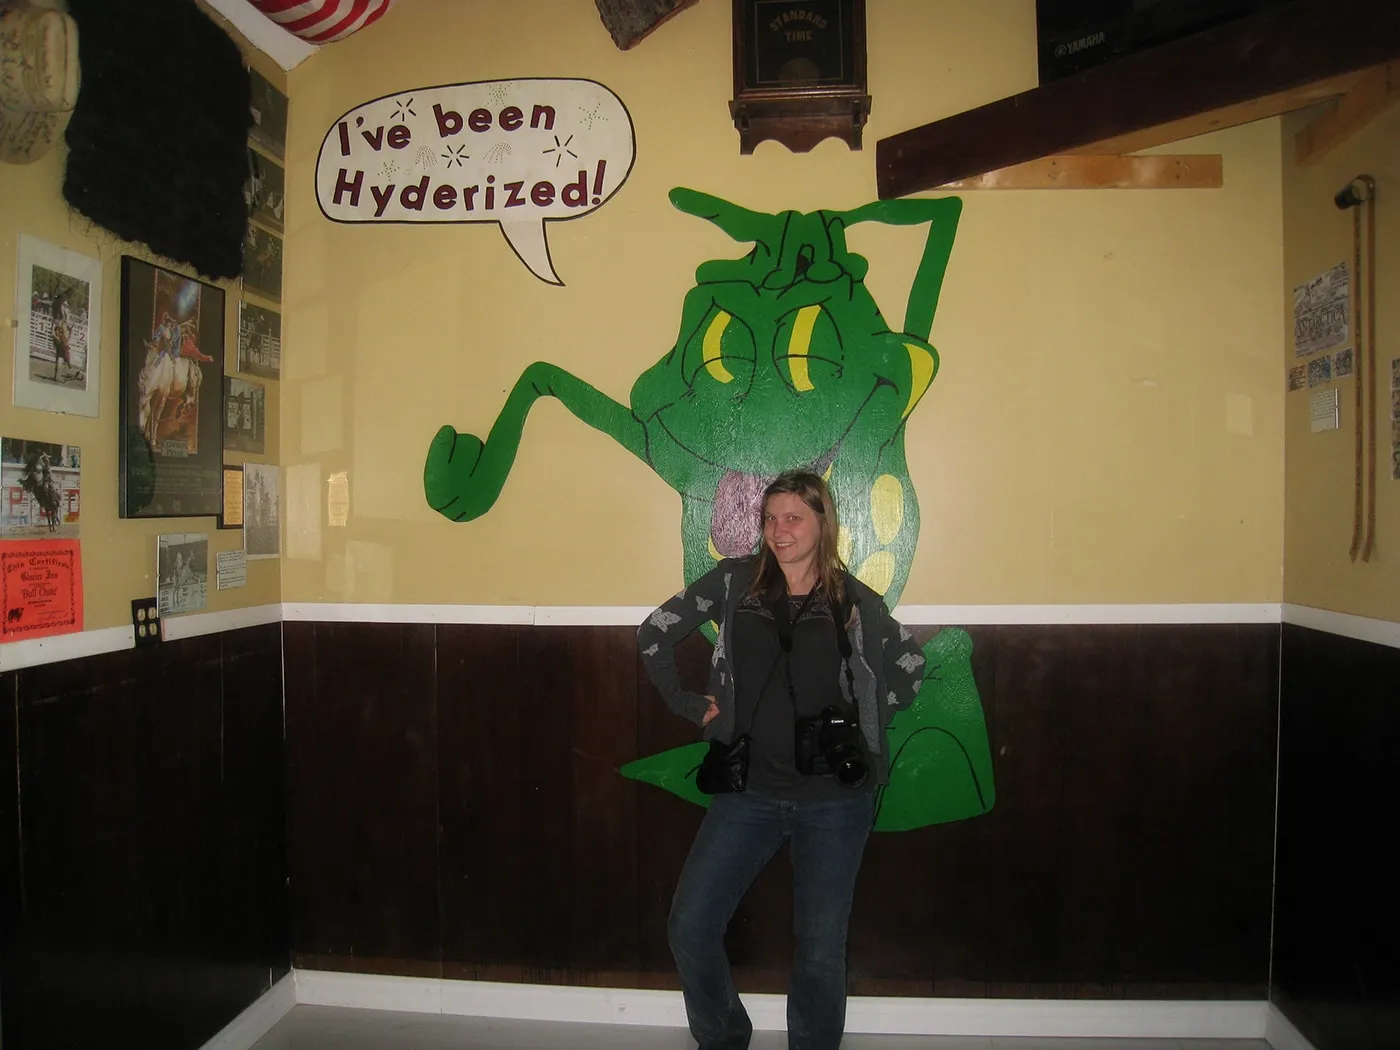 VICTORY! I was Hyderized at the Glacier Inn in Hyder, Alaska.